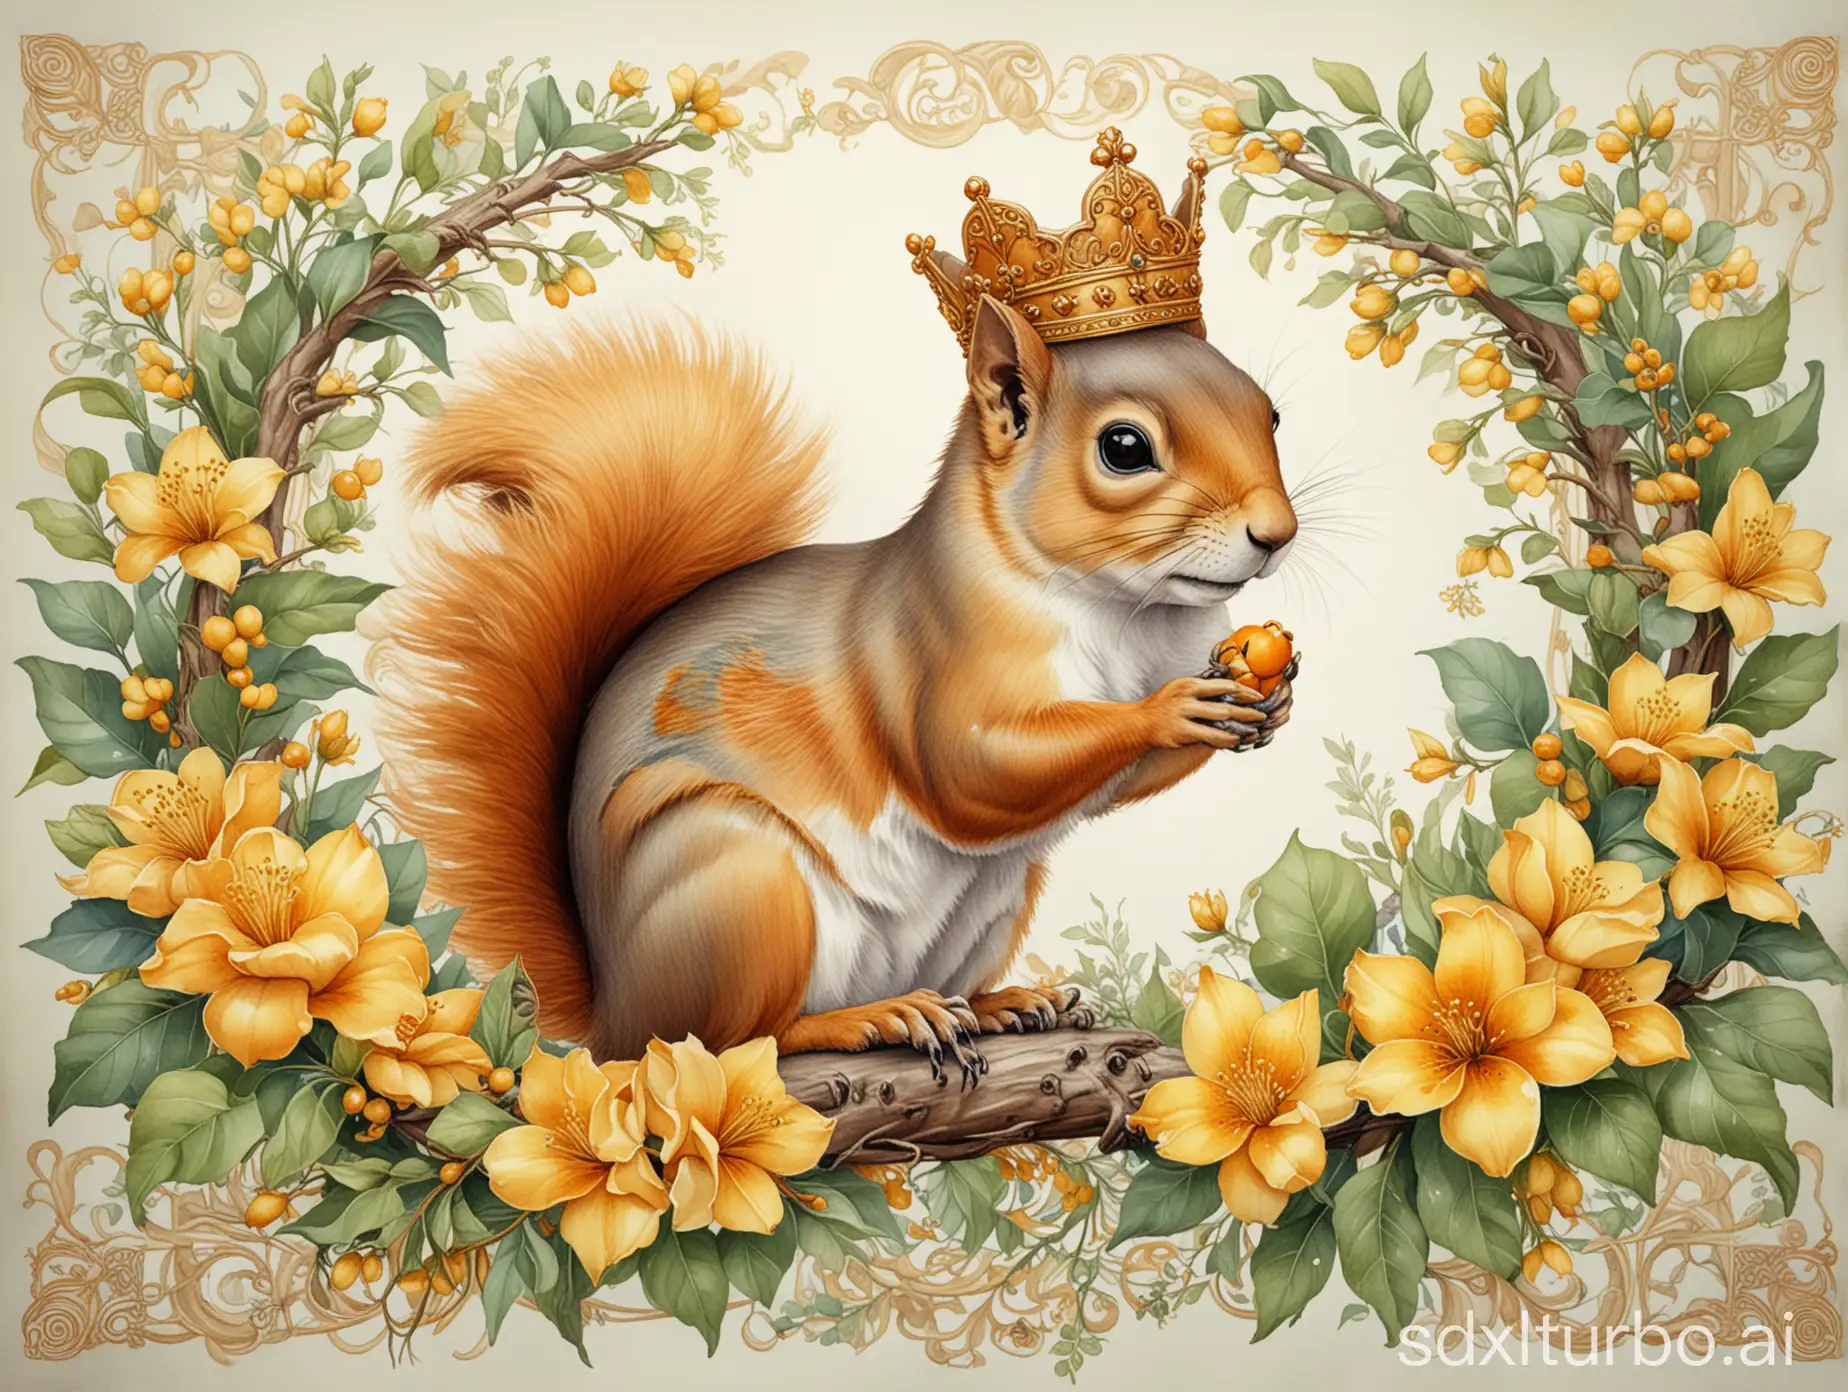 A squirrel crowned with a golden crown sits on a branch, the branch has green leaves and yellow-orange blossoms, highly and delicately detailed drawing, intricate watercolor, art nouveau borders